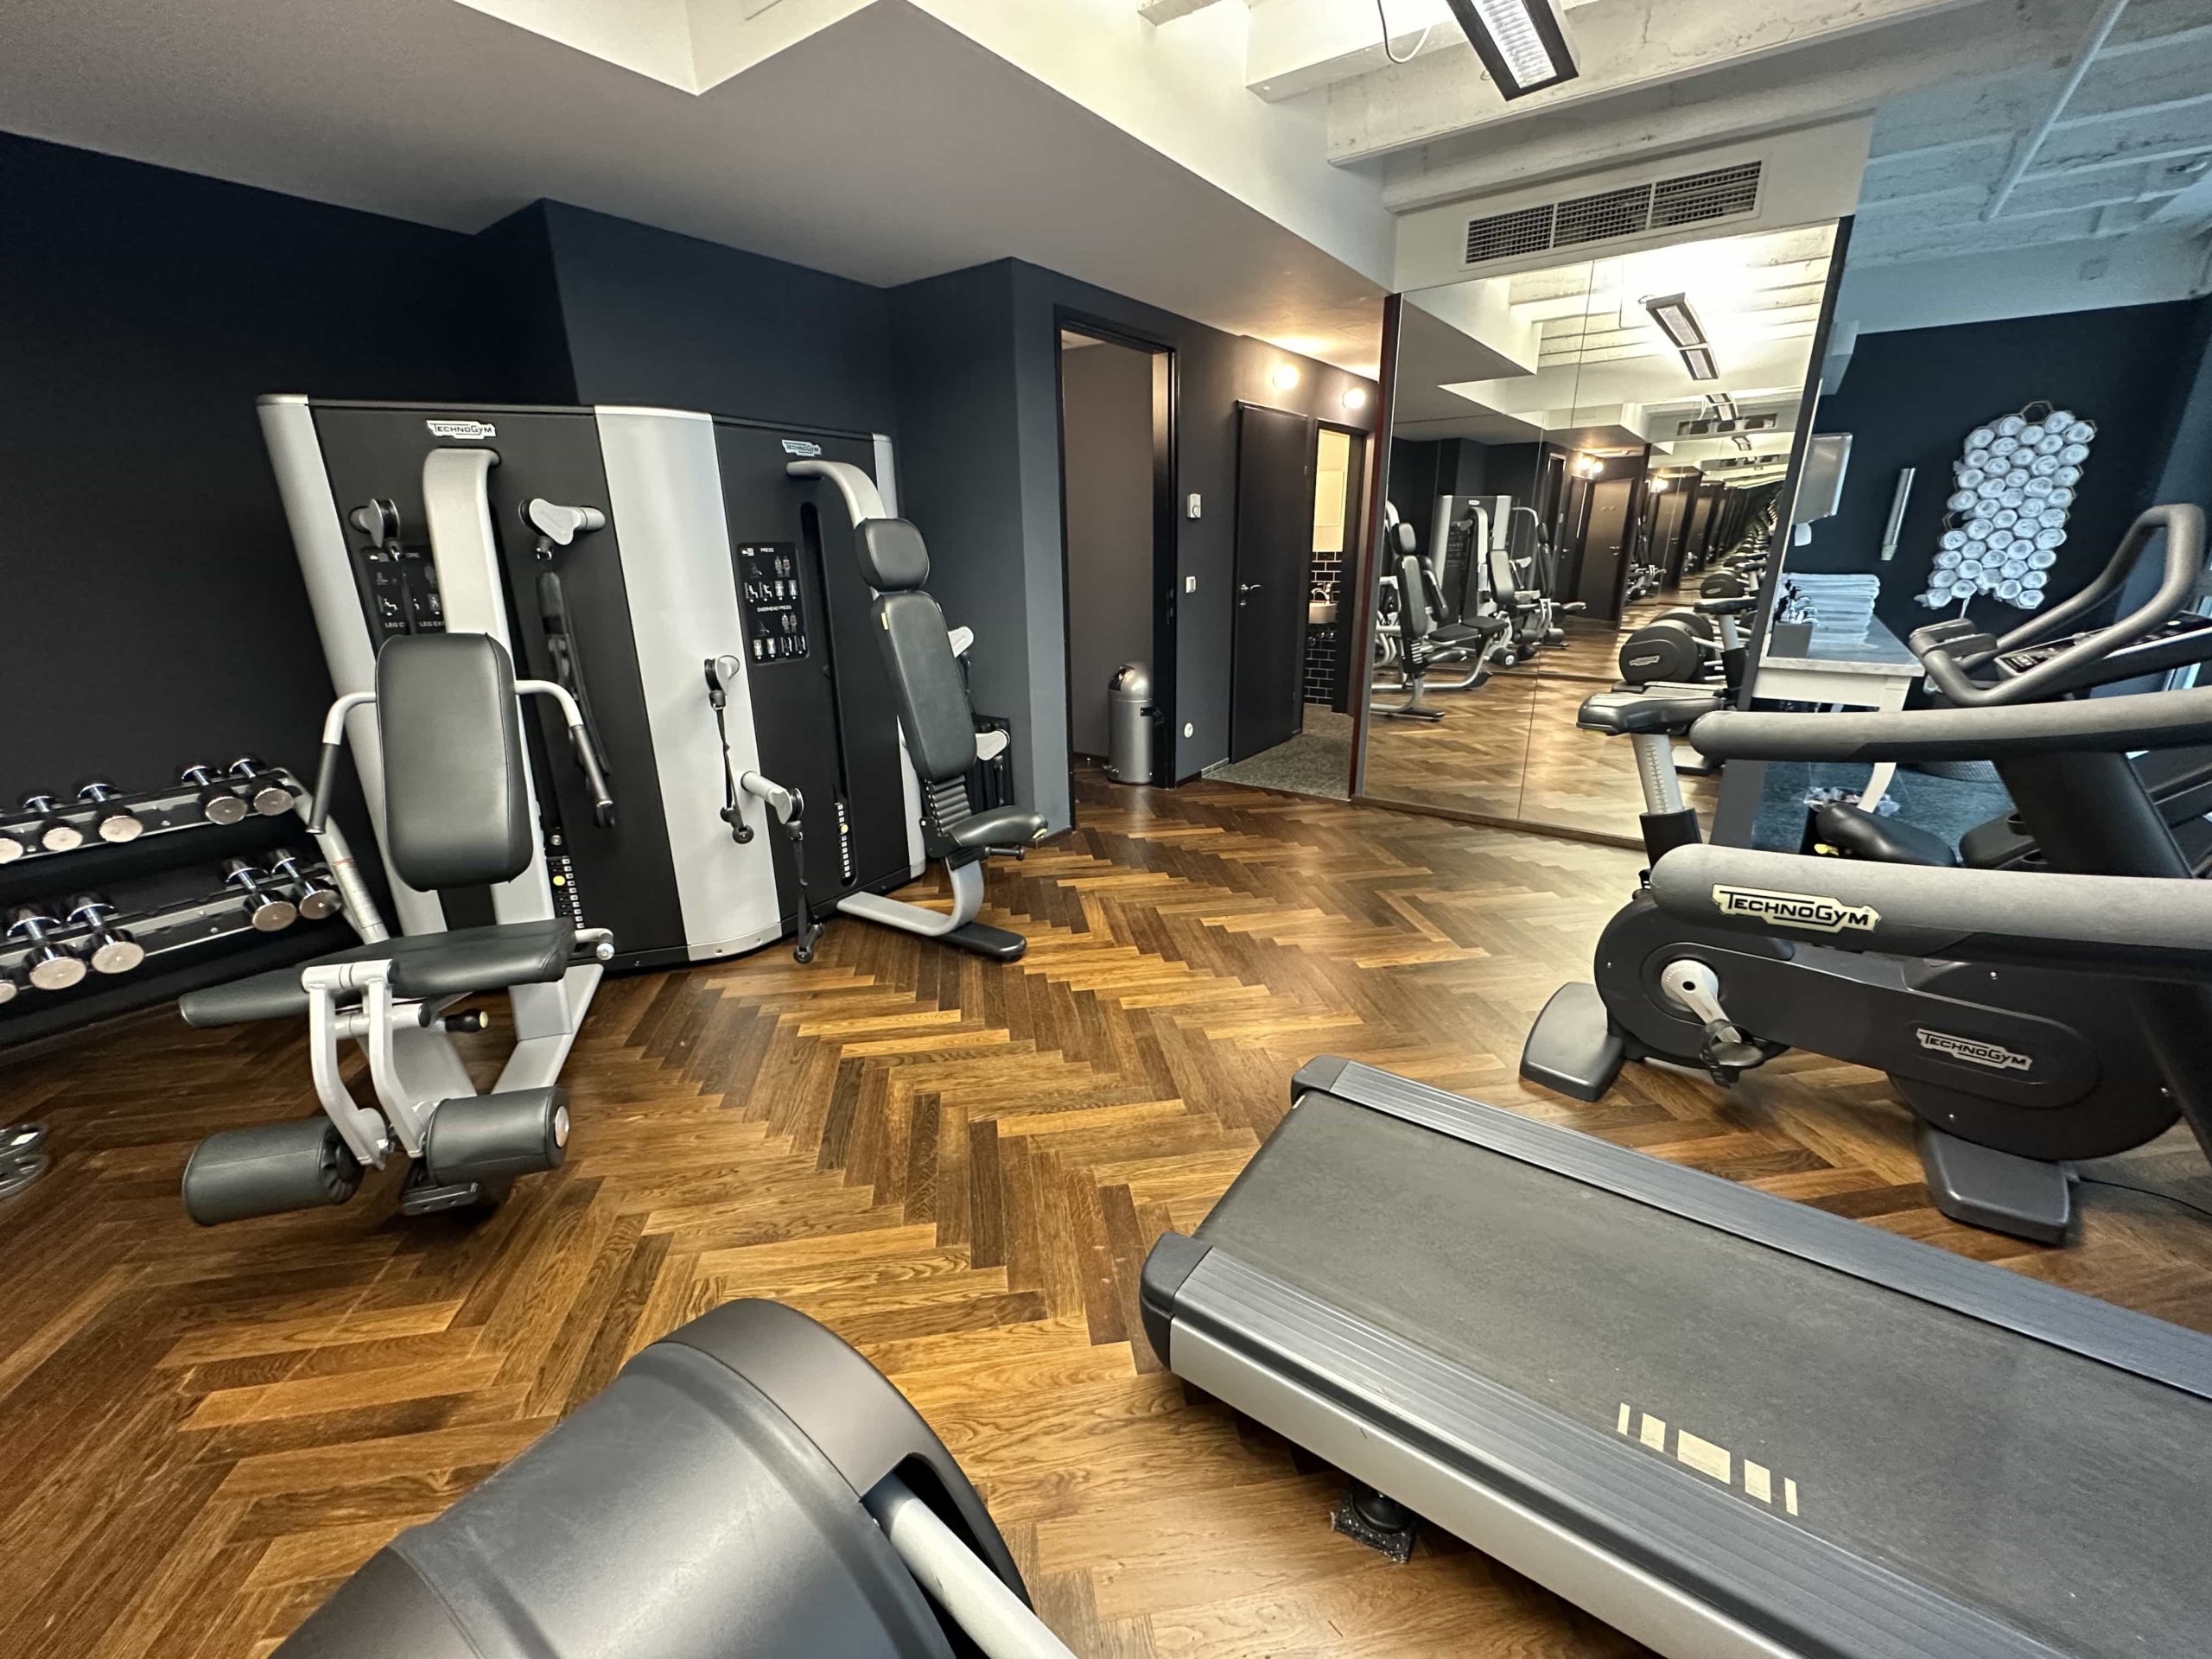 Gym equipment in a room which also features toilet and shower facilities